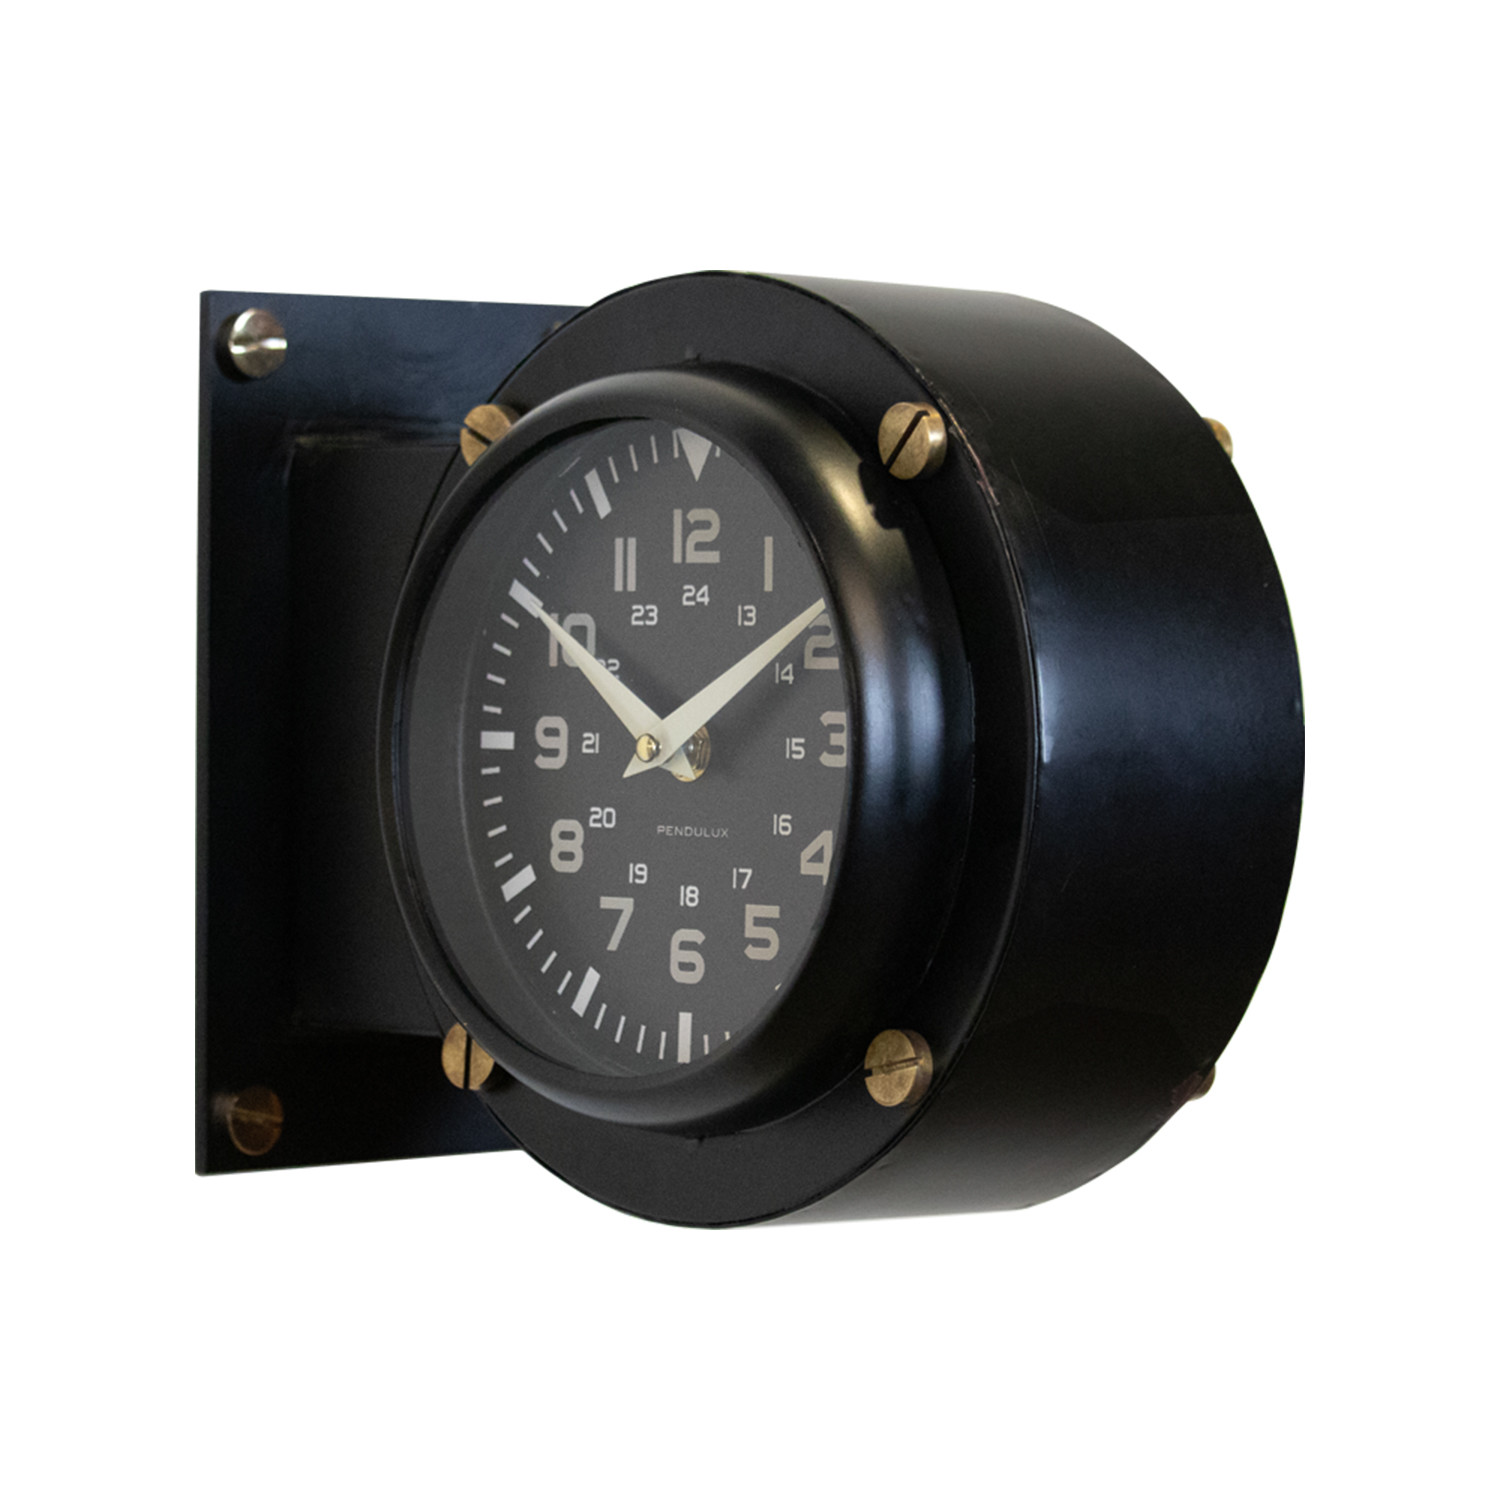 Airport Wall Clock Pendulux Touch of Modern